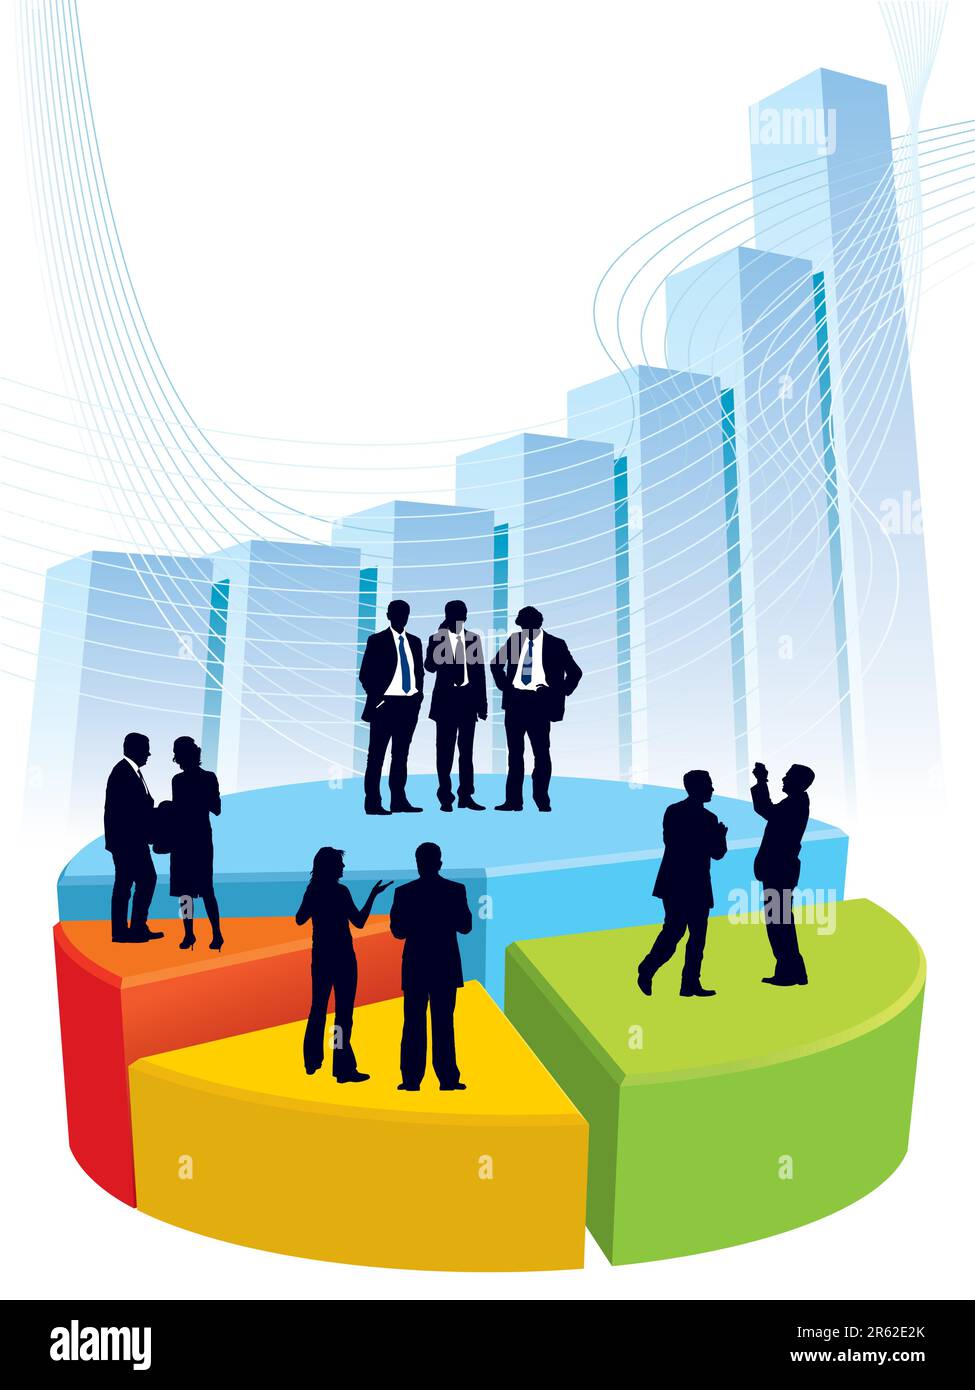 Successful people are standing on a large graph, conceptual business illustration. Stock Vector